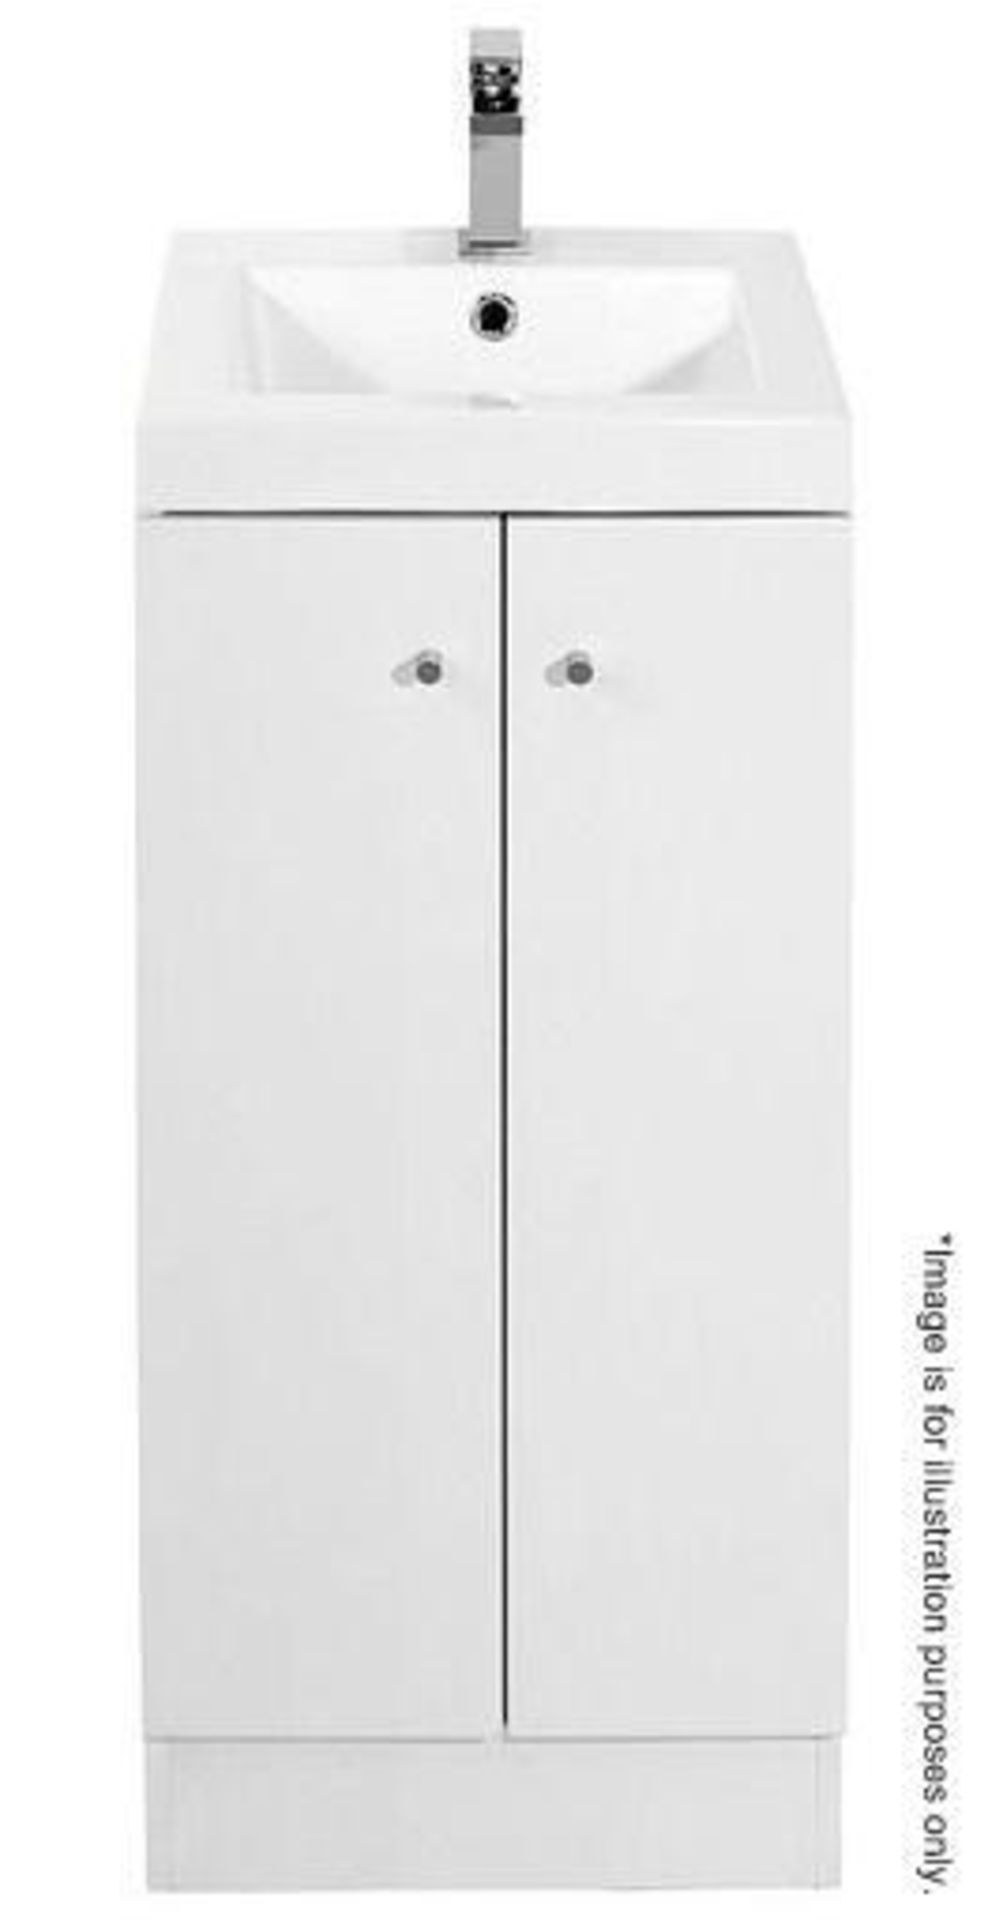 5 x Alpine Duo 400 Floorstanding Vanity Units In Gloss White - Brand New Boxed Stock - Dimensions: H - Image 3 of 3